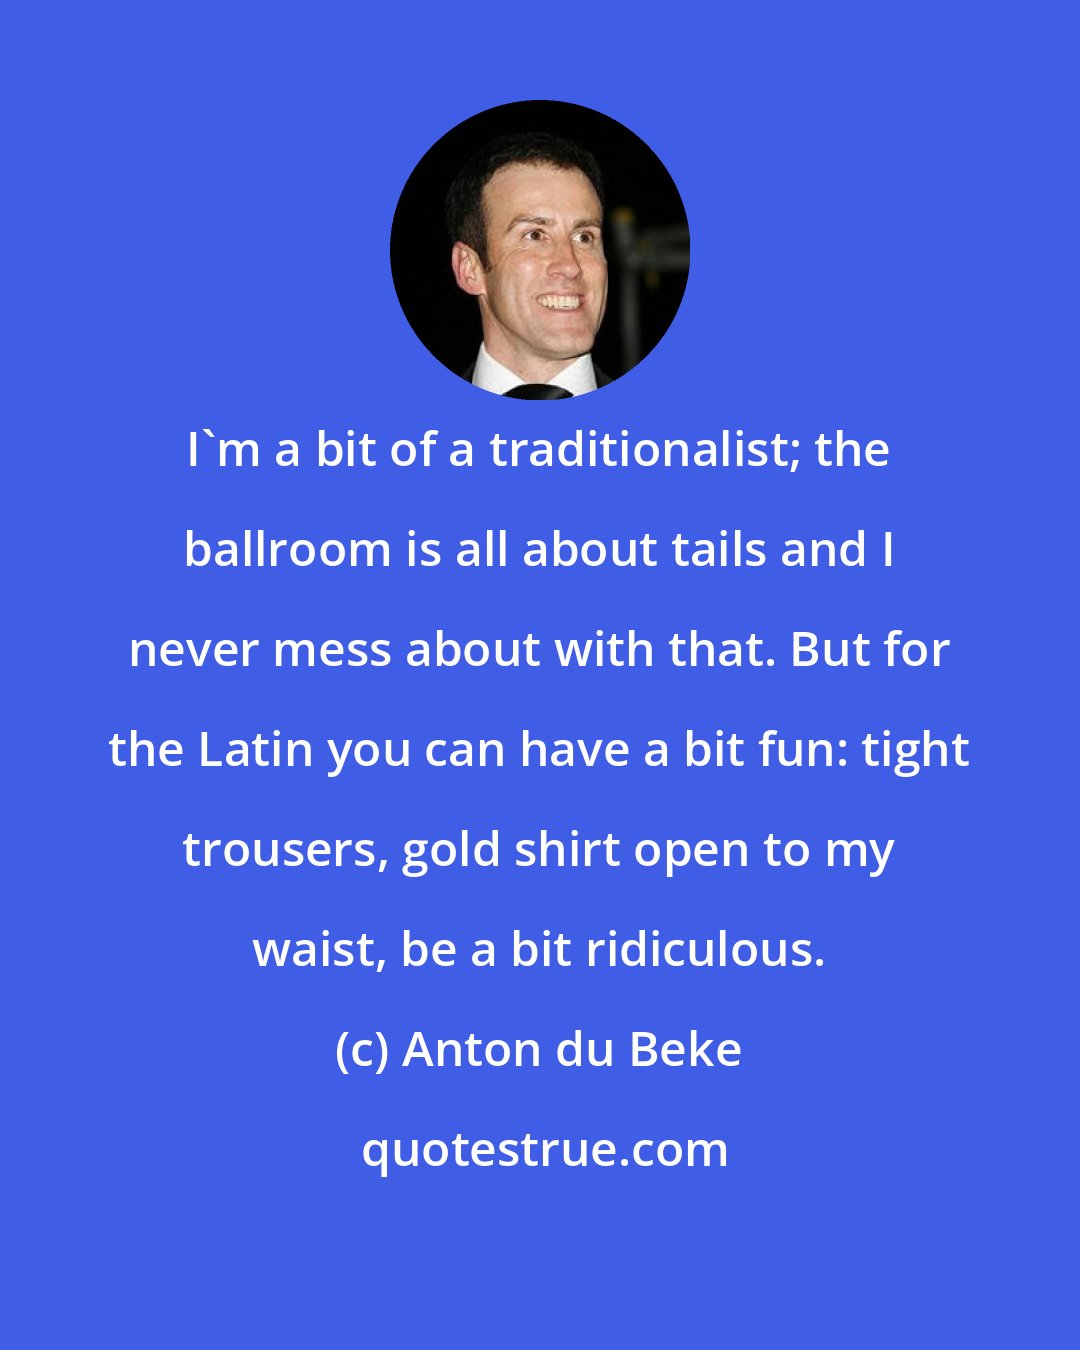 Anton du Beke: I'm a bit of a traditionalist; the ballroom is all about tails and I never mess about with that. But for the Latin you can have a bit fun: tight trousers, gold shirt open to my waist, be a bit ridiculous.